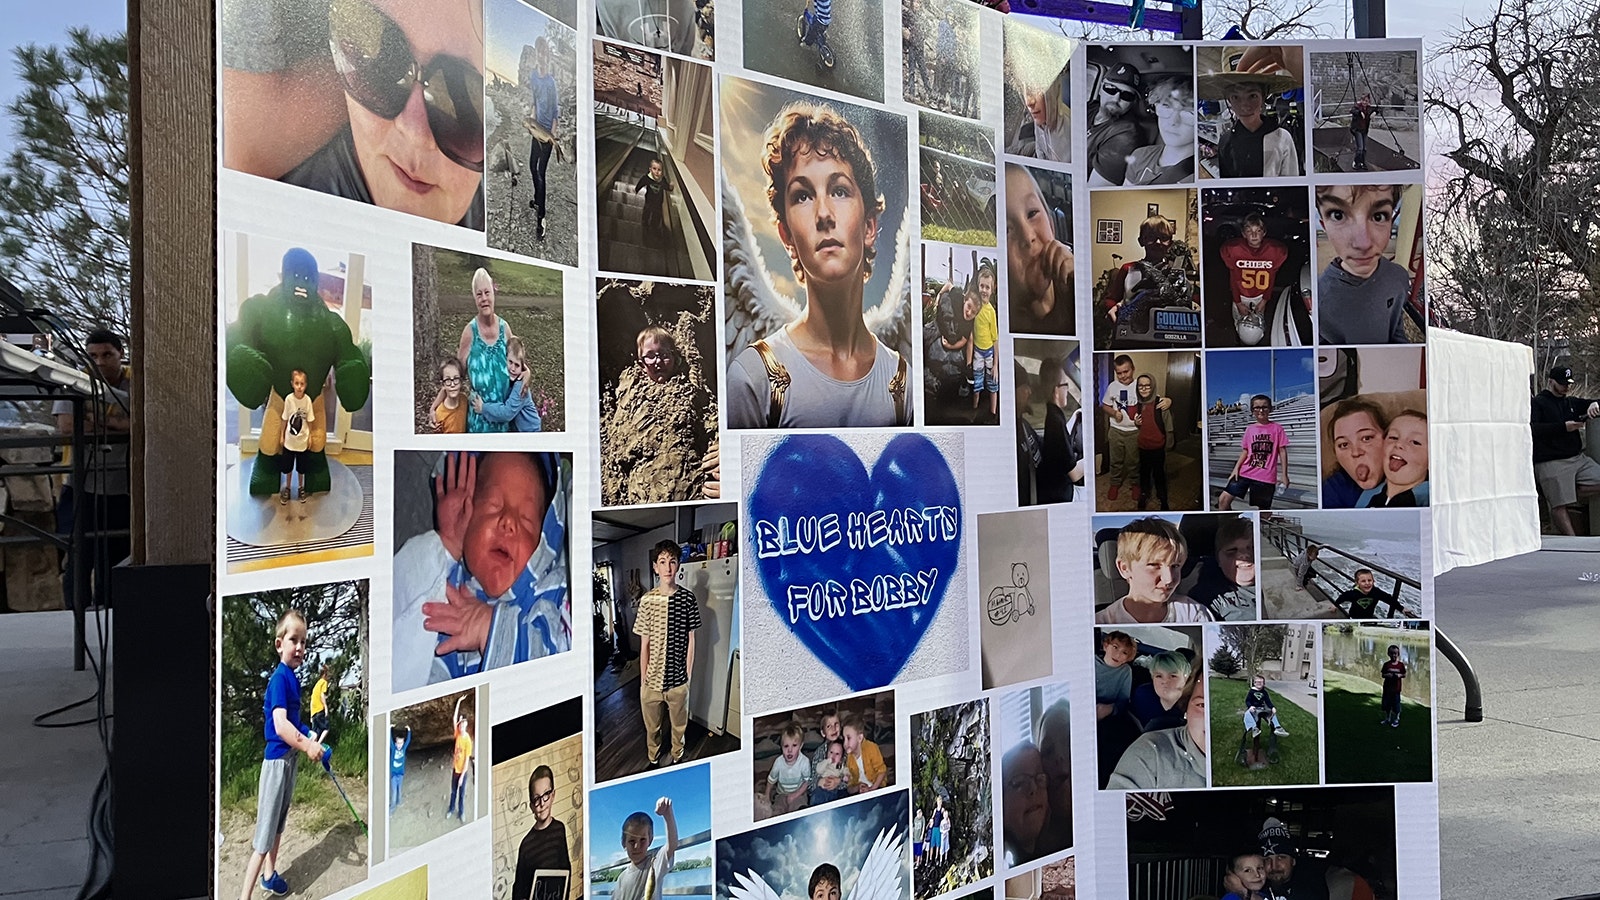 Many people came to the stage to take photos of the collage of Bobby Maher’s life.